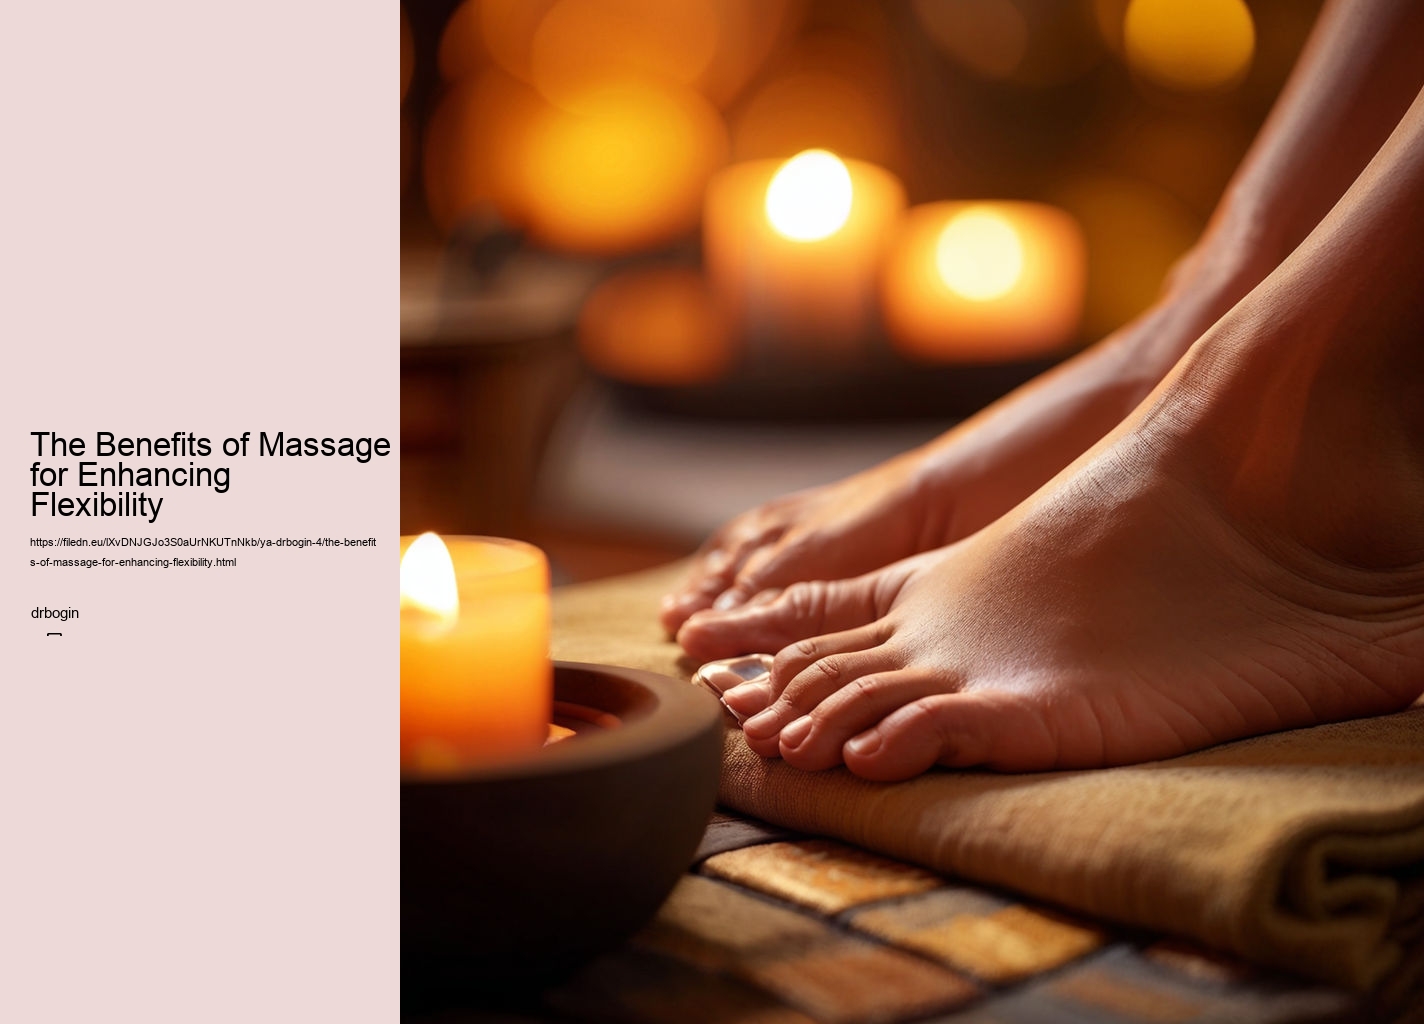 The Benefits of Massage for Enhancing Flexibility